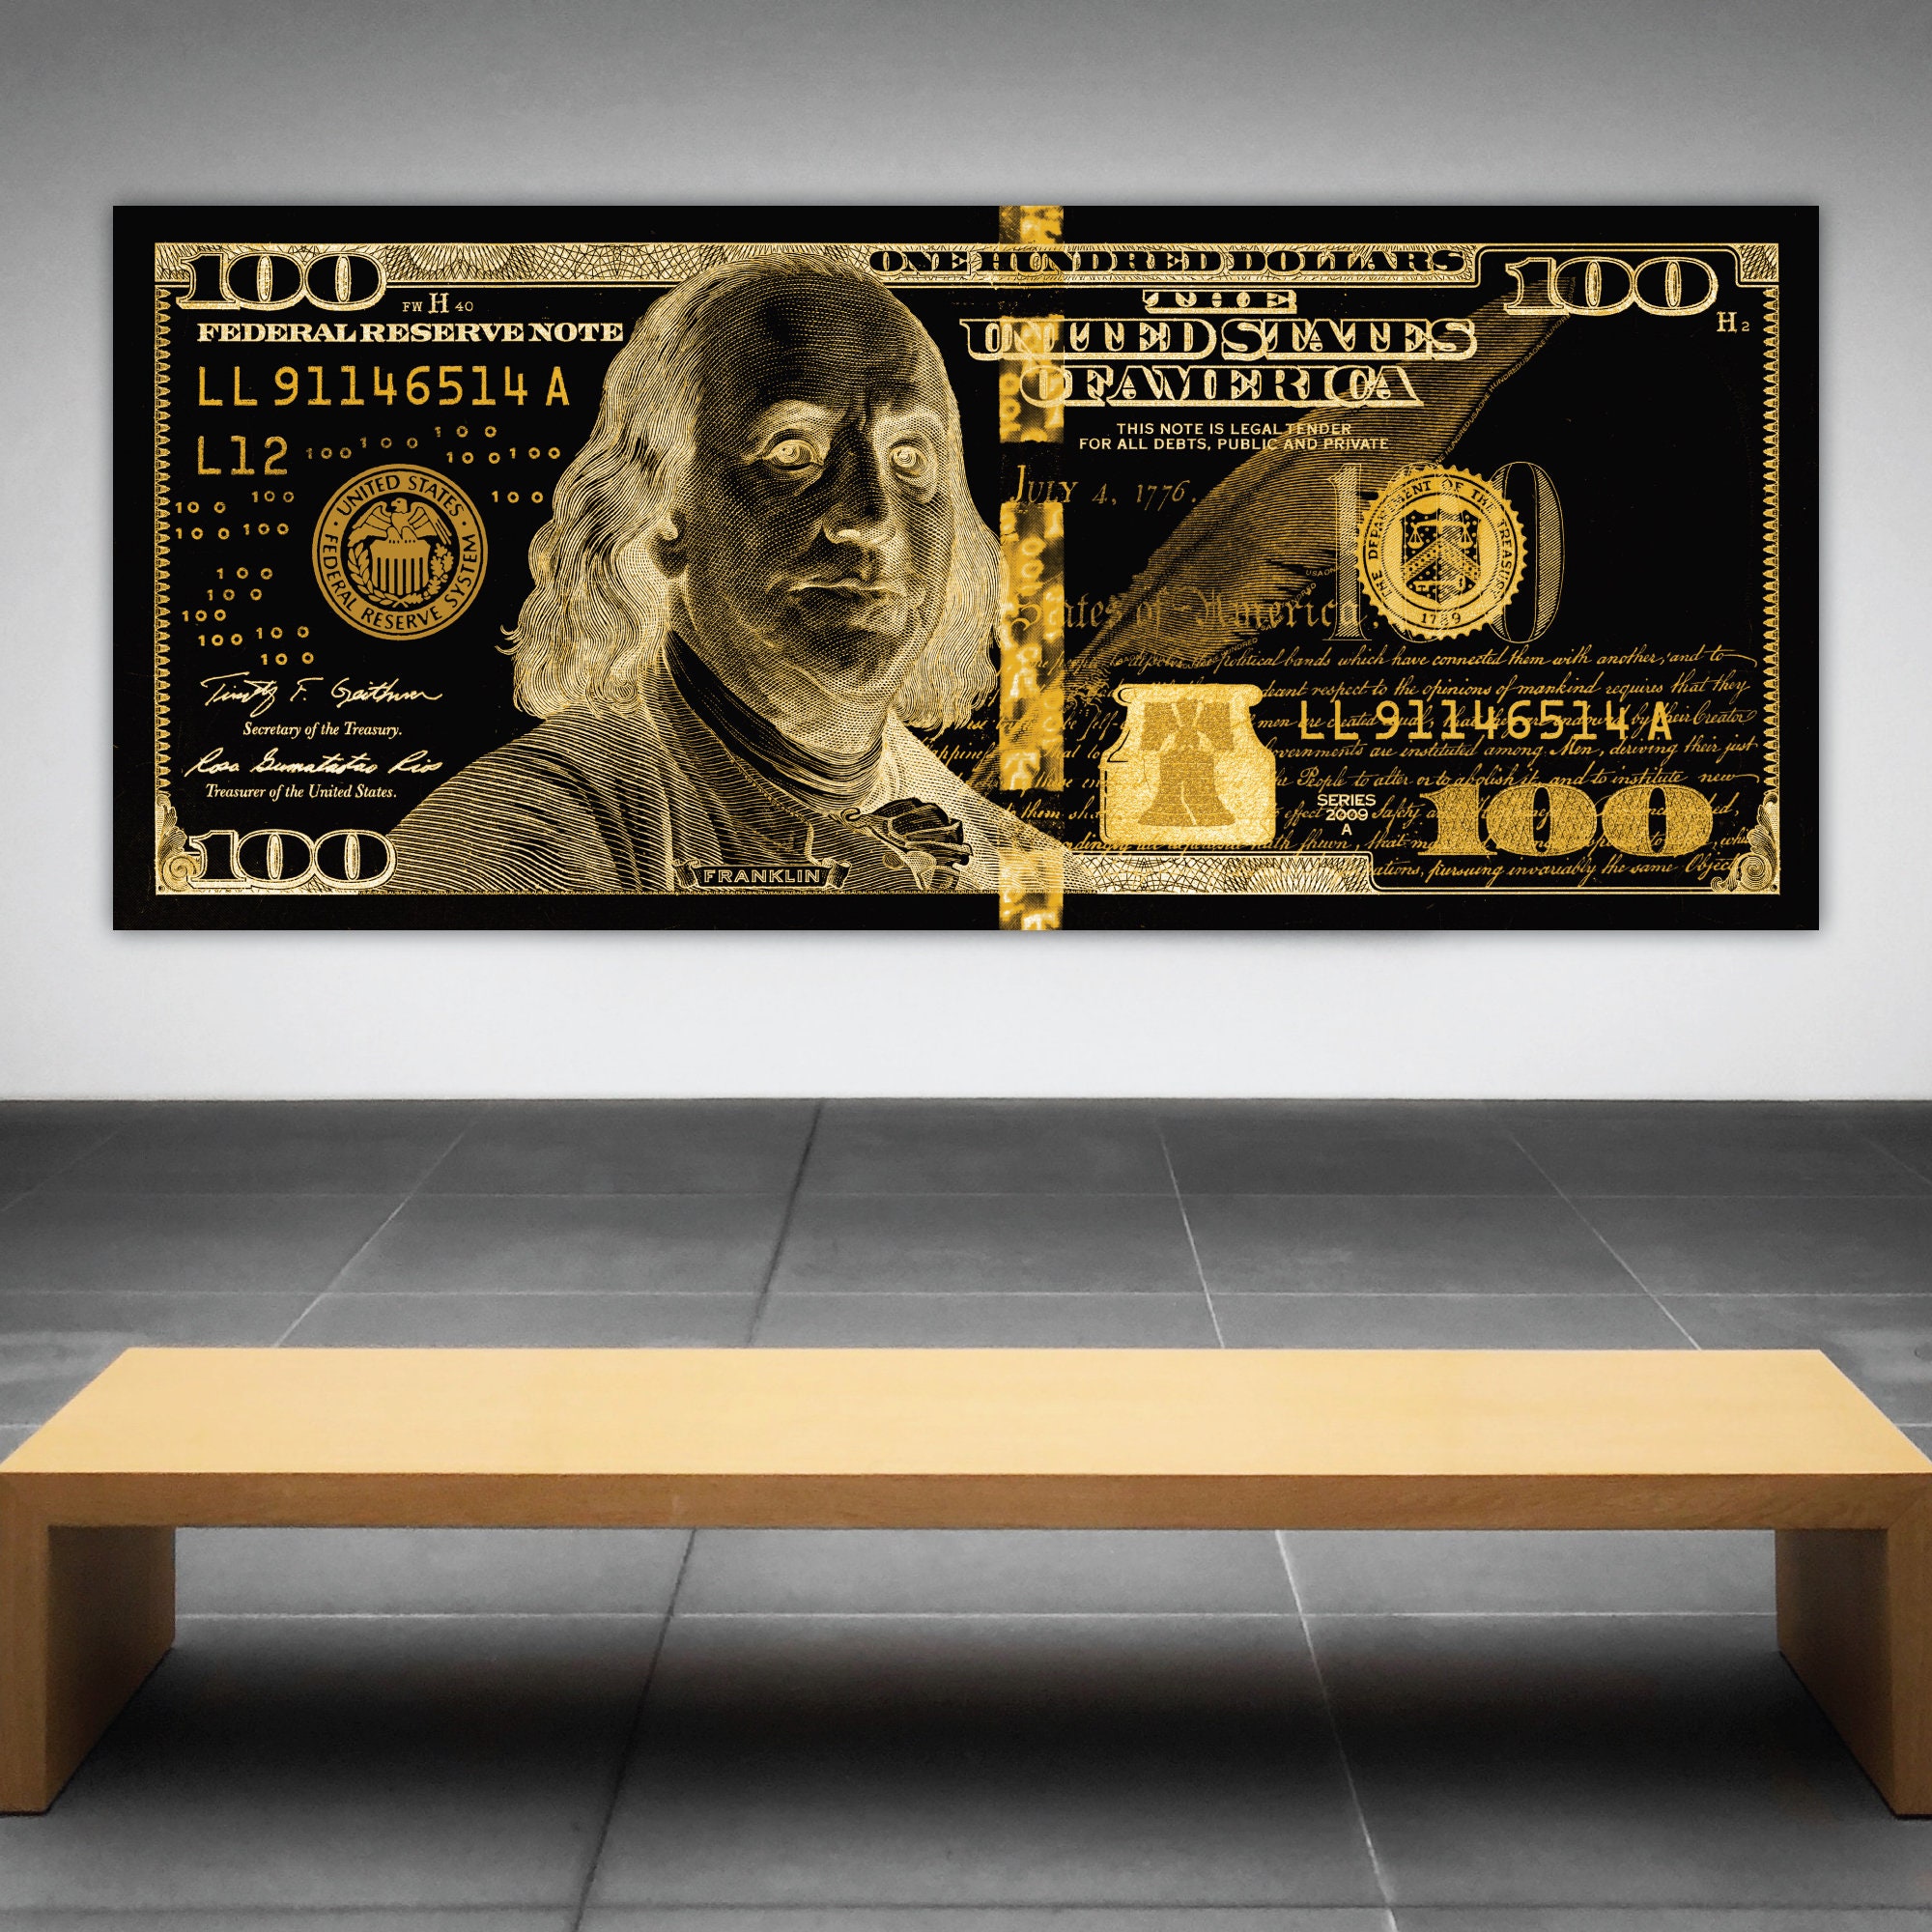  AWESOMETIK 100 Dollar Bill Money Press Design Canvas Print  Art Home. Ready to Hang. Made in USA (36in x 16in Modern Black Framed,  Original Benjamin): Posters & Prints